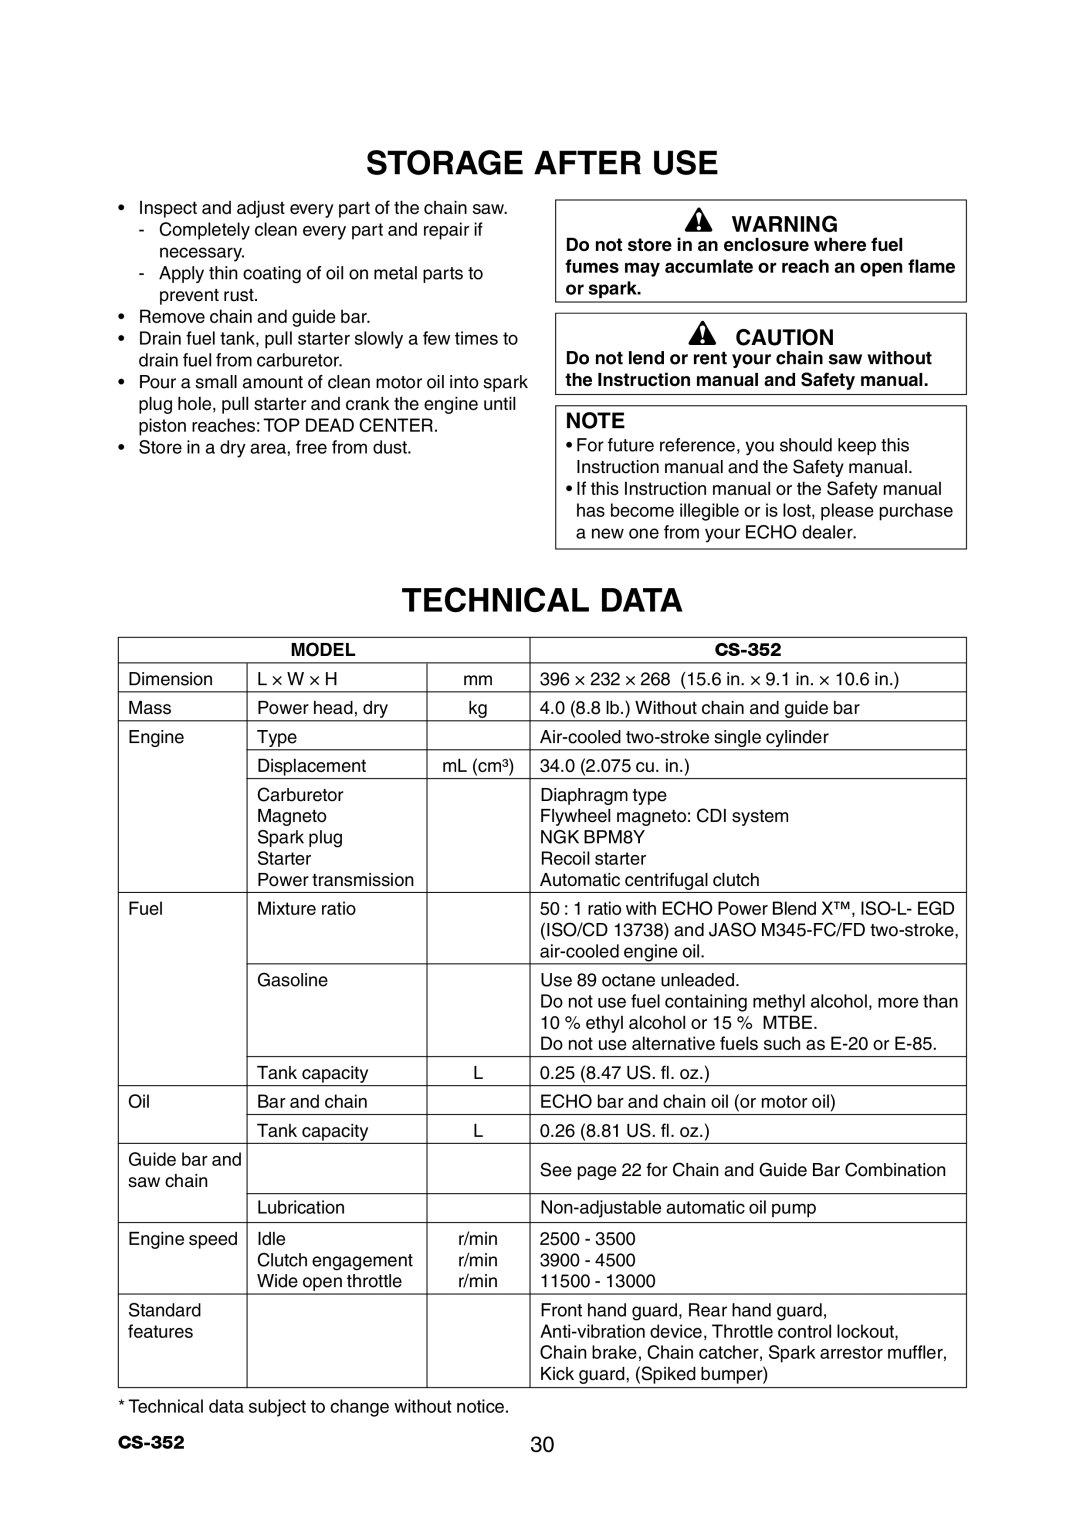 Echo CS-352 instruction manual Storage After Use, Technical Data 